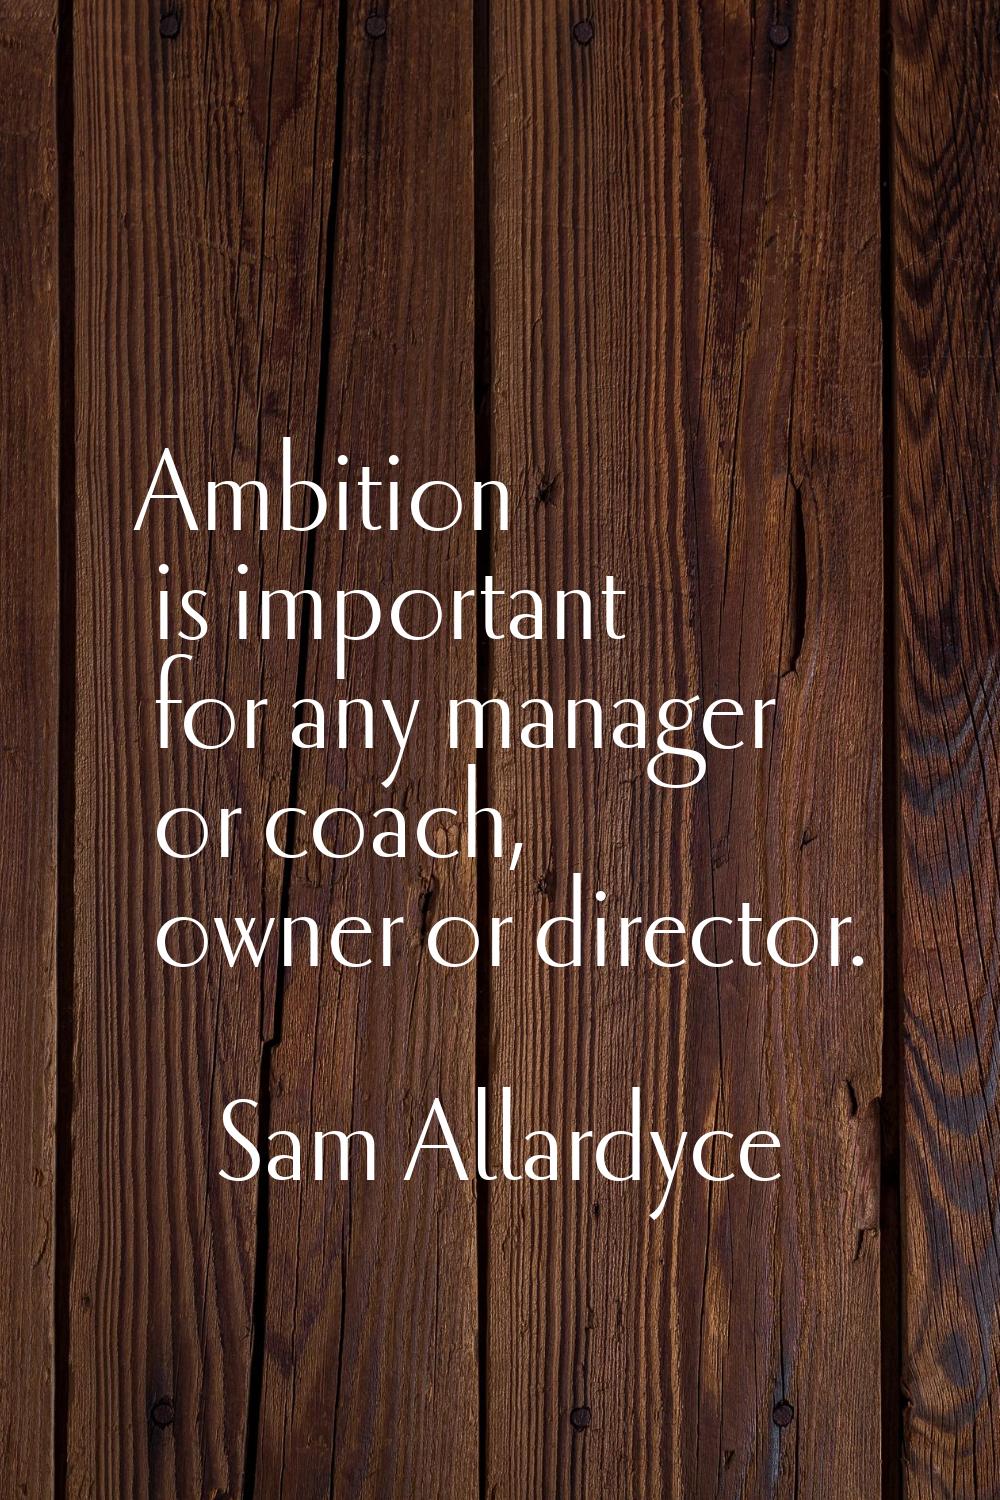 Ambition is important for any manager or coach, owner or director.